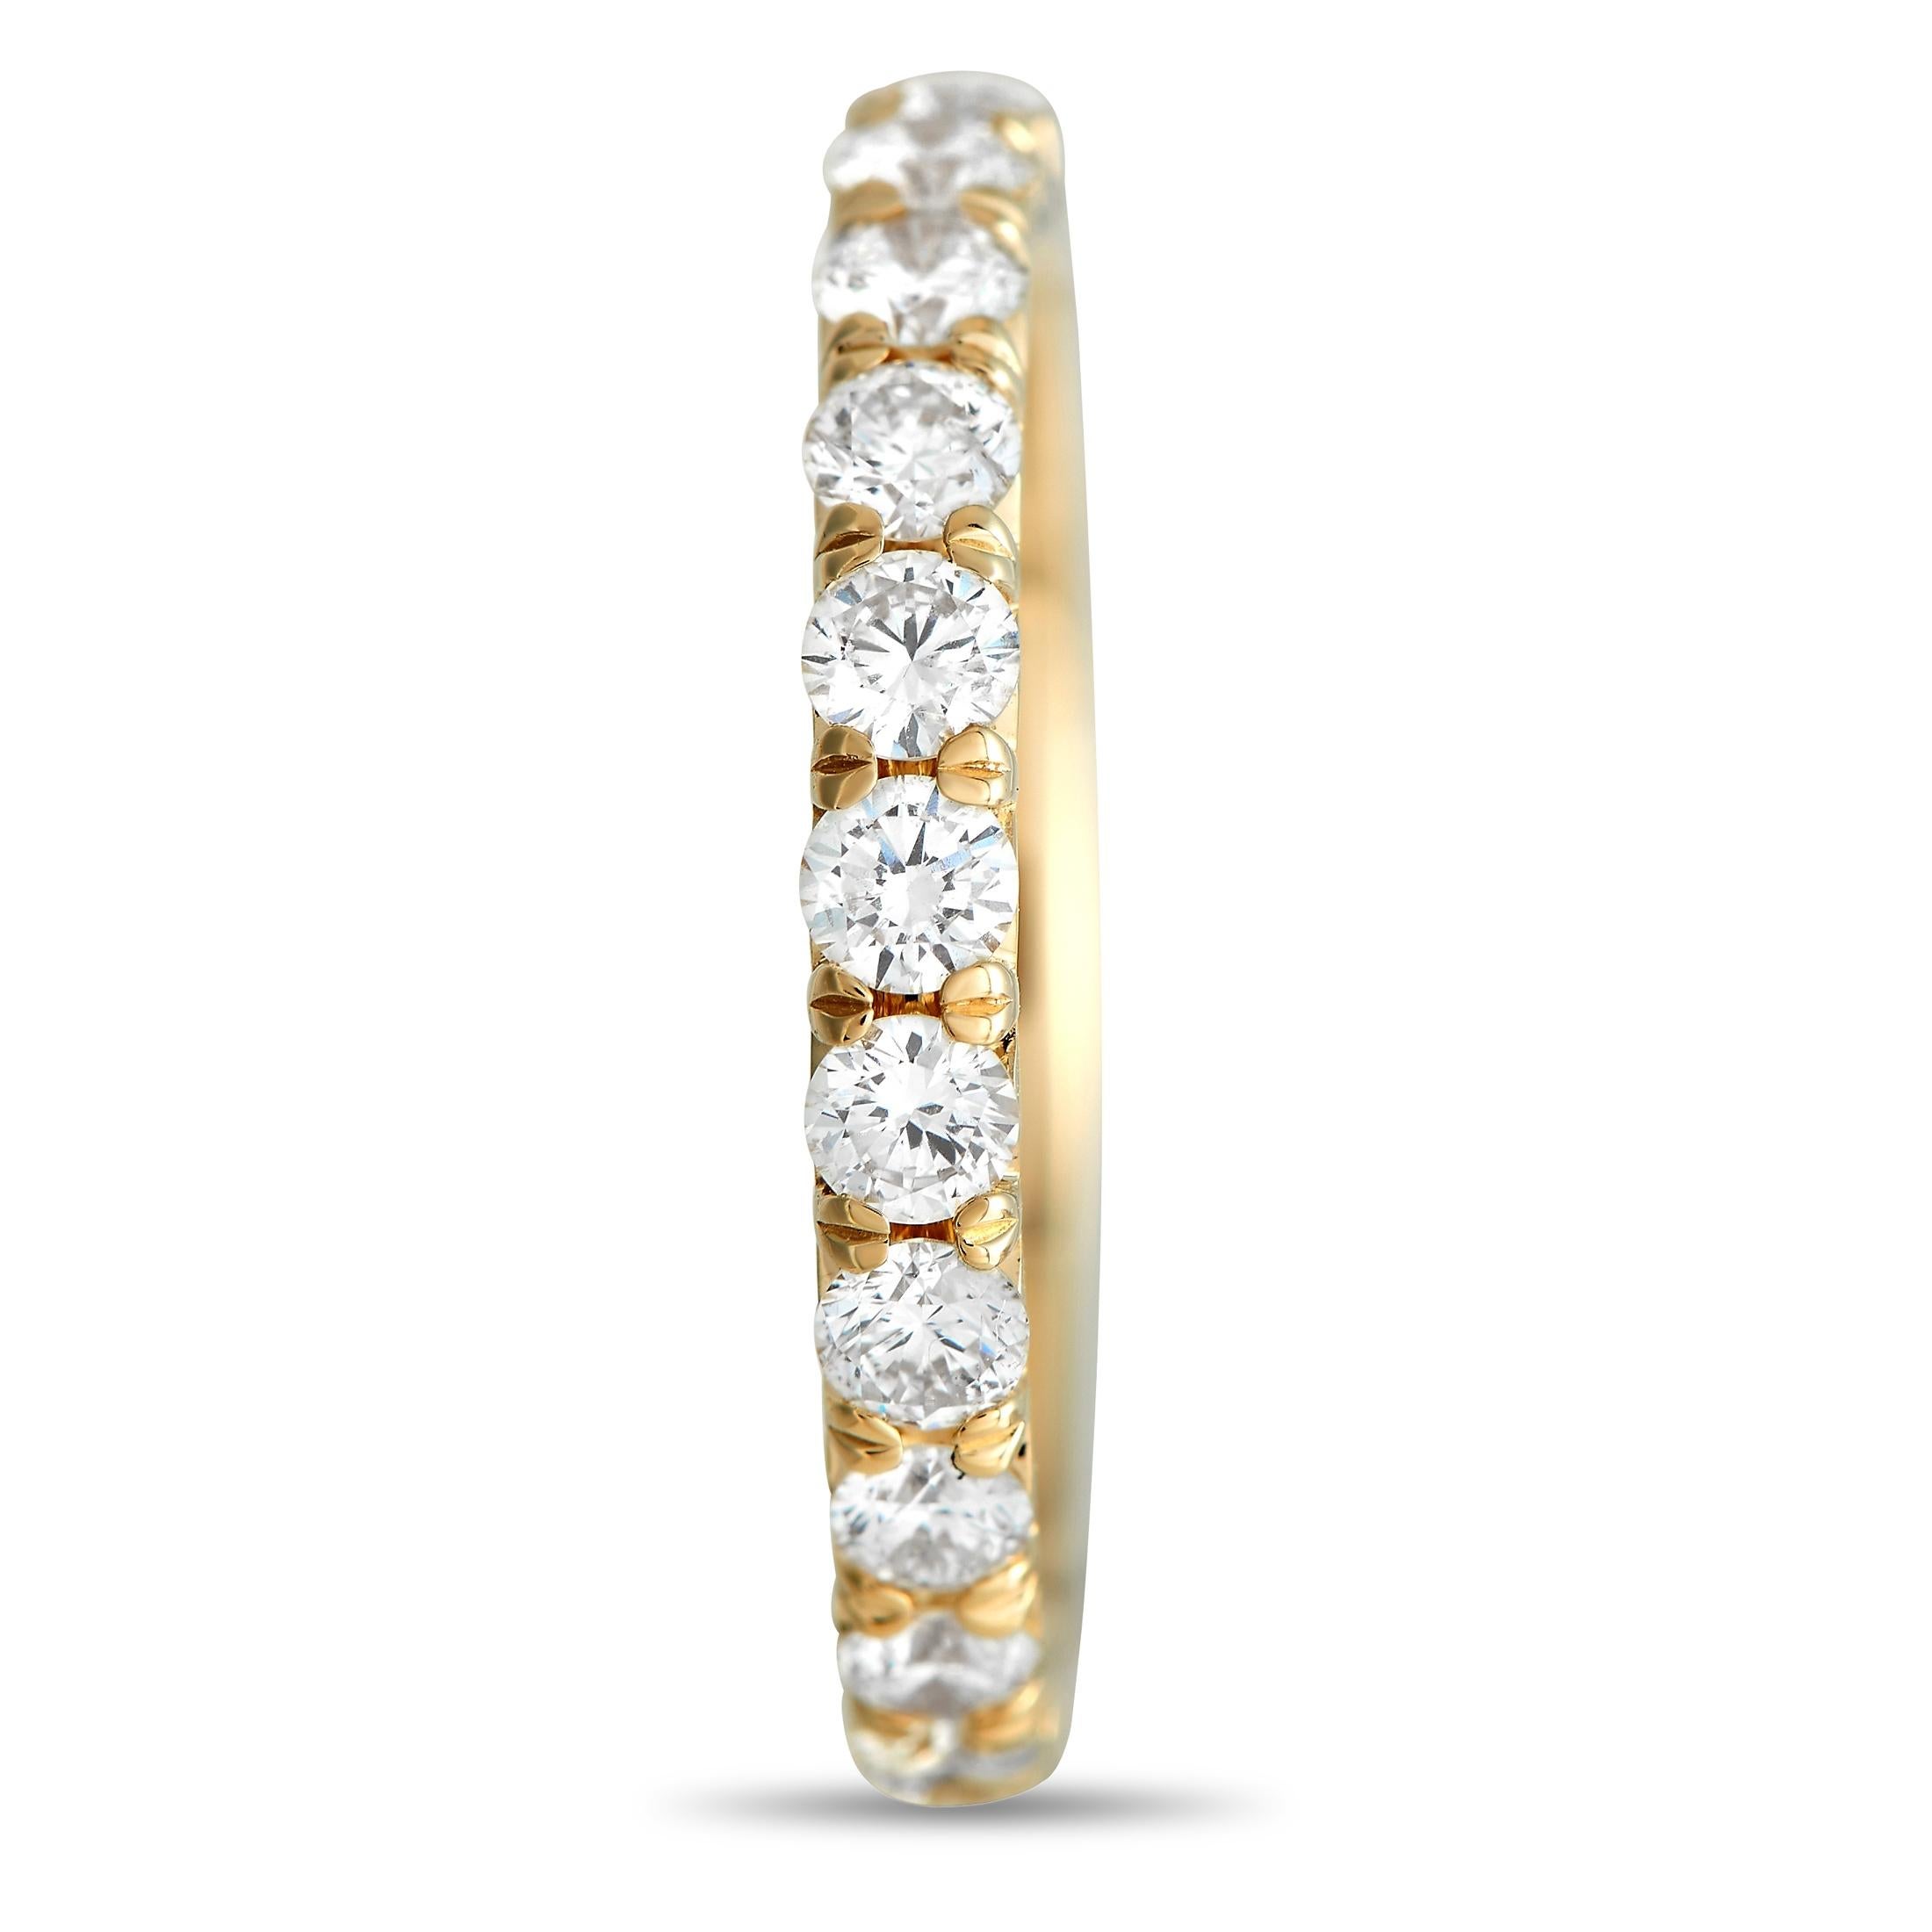 Sparkling diamonds totaling 1.75 carats allow this band ring to effortlessly catch the light. This piece’s stunning 18K yellow gold setting measures 2mm wide. 
 
 This jewelry piece is offered in brand new condition and includes a gift box.